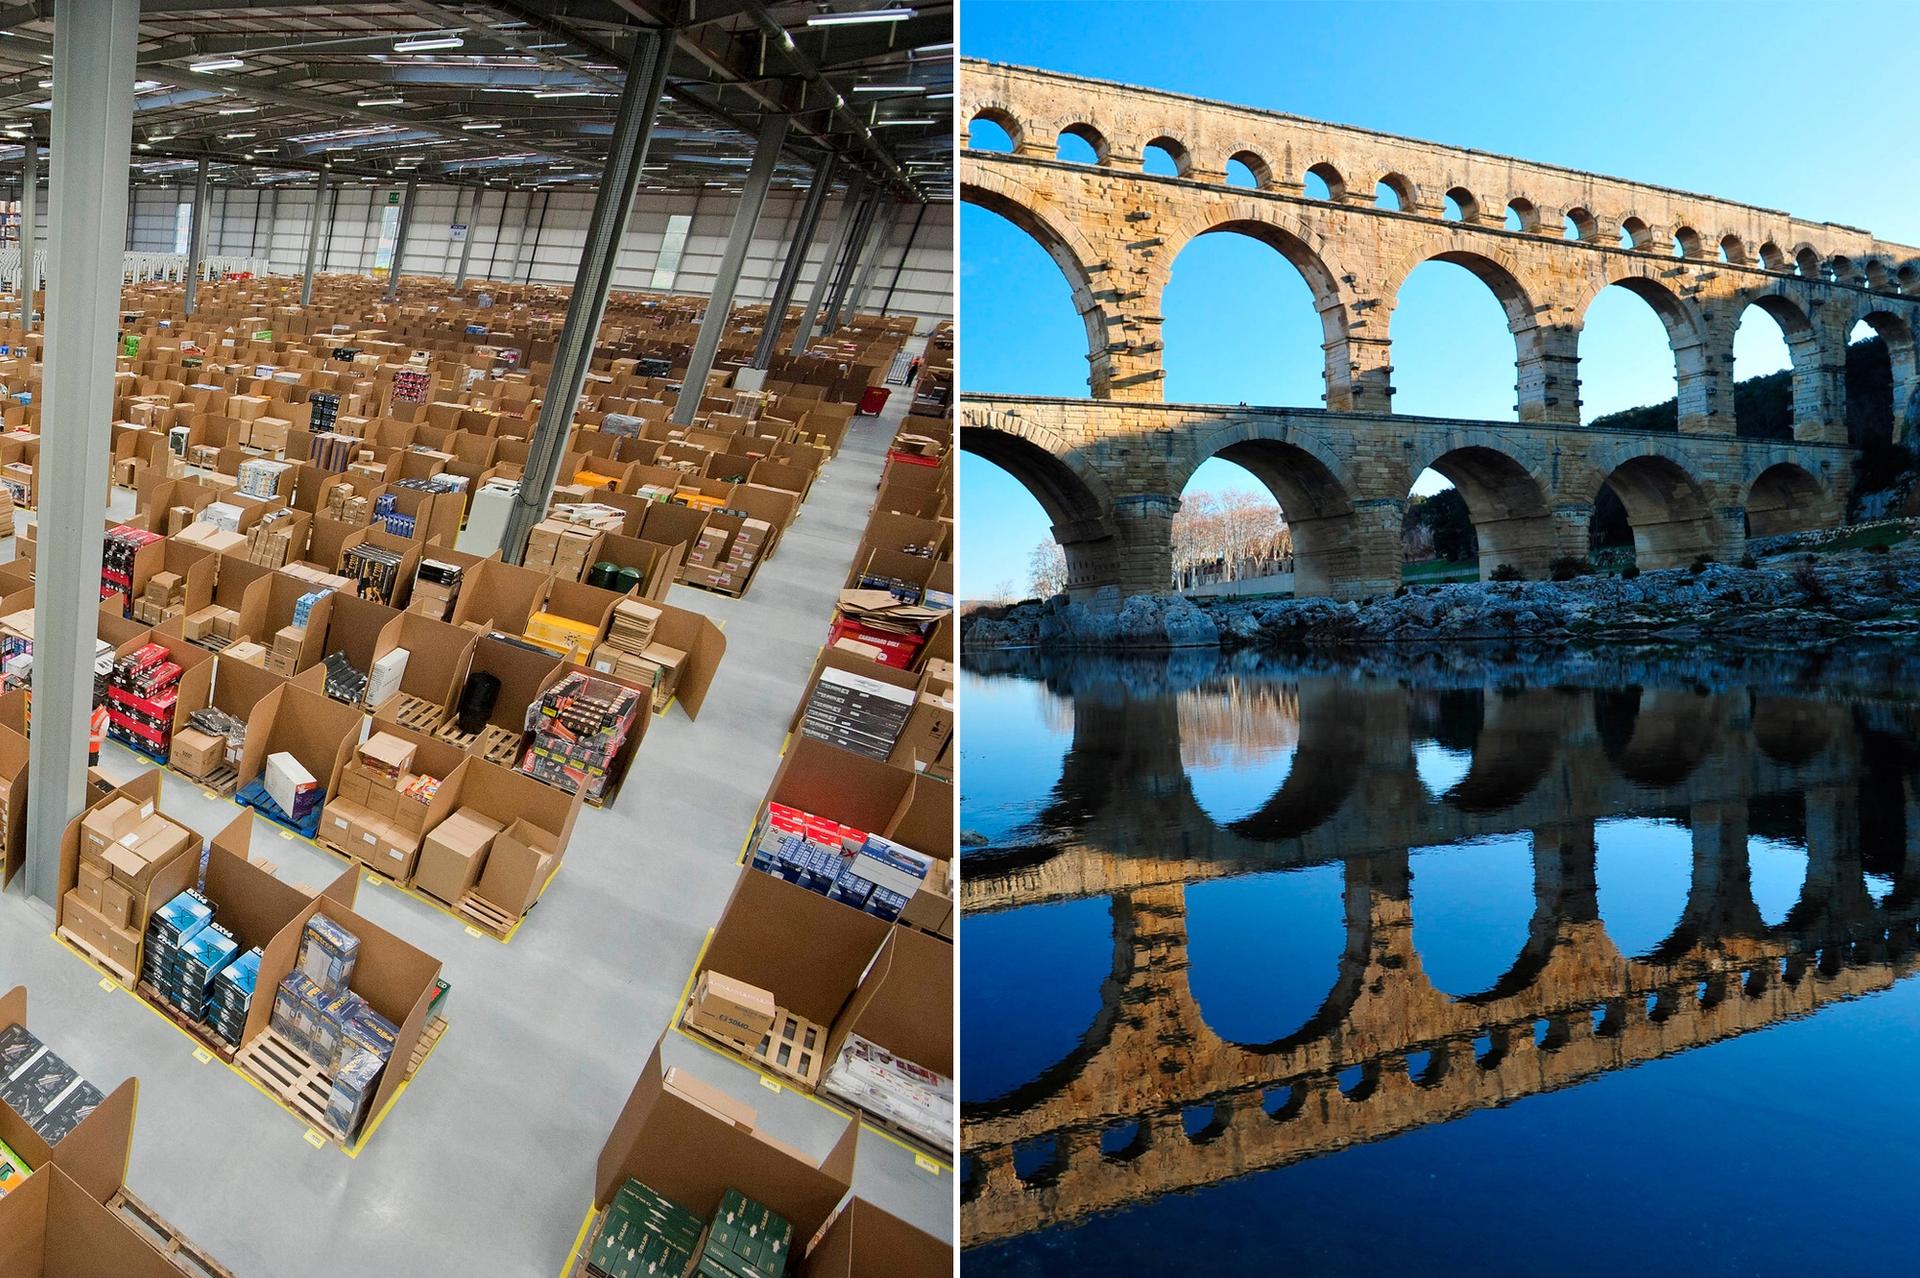 Protests have erupted over Amazon's intention of building a warehouse near Pont du Gard, an ancient Roman aqueduct in the south of France 